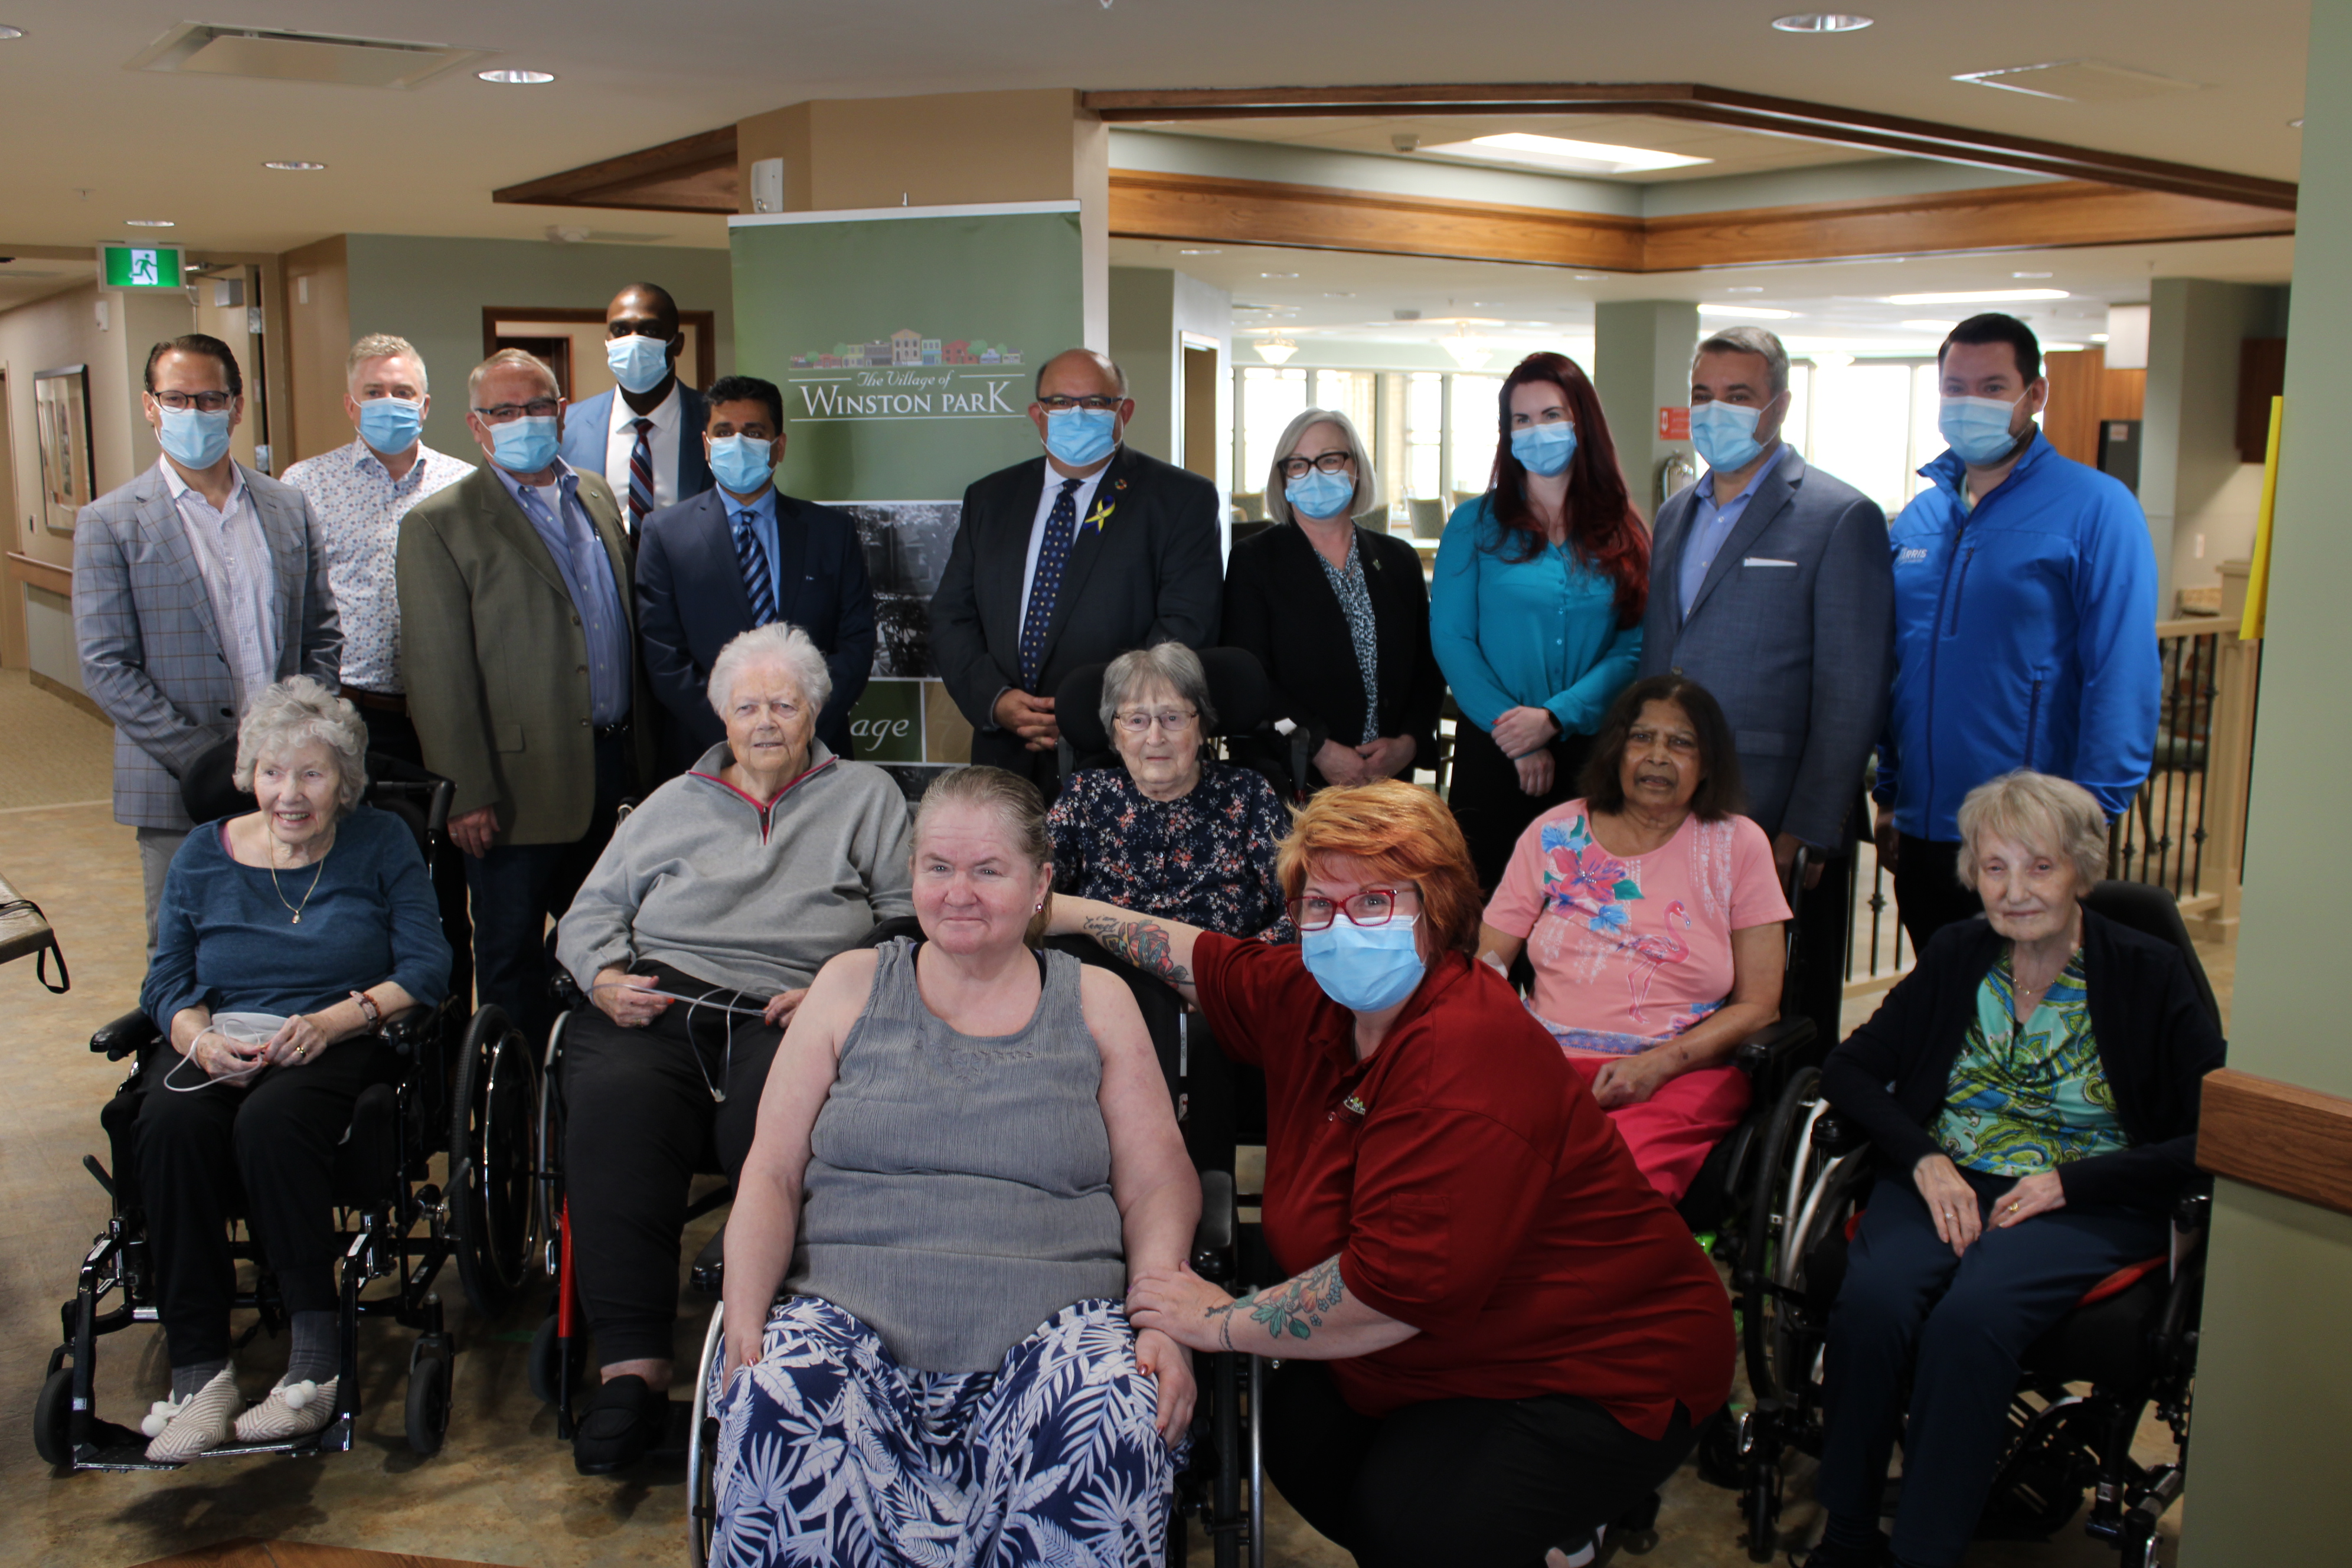 Residents of the new Winston park pose with dignitaries during a visit with Minister of Long Term Care, Paul Calandra